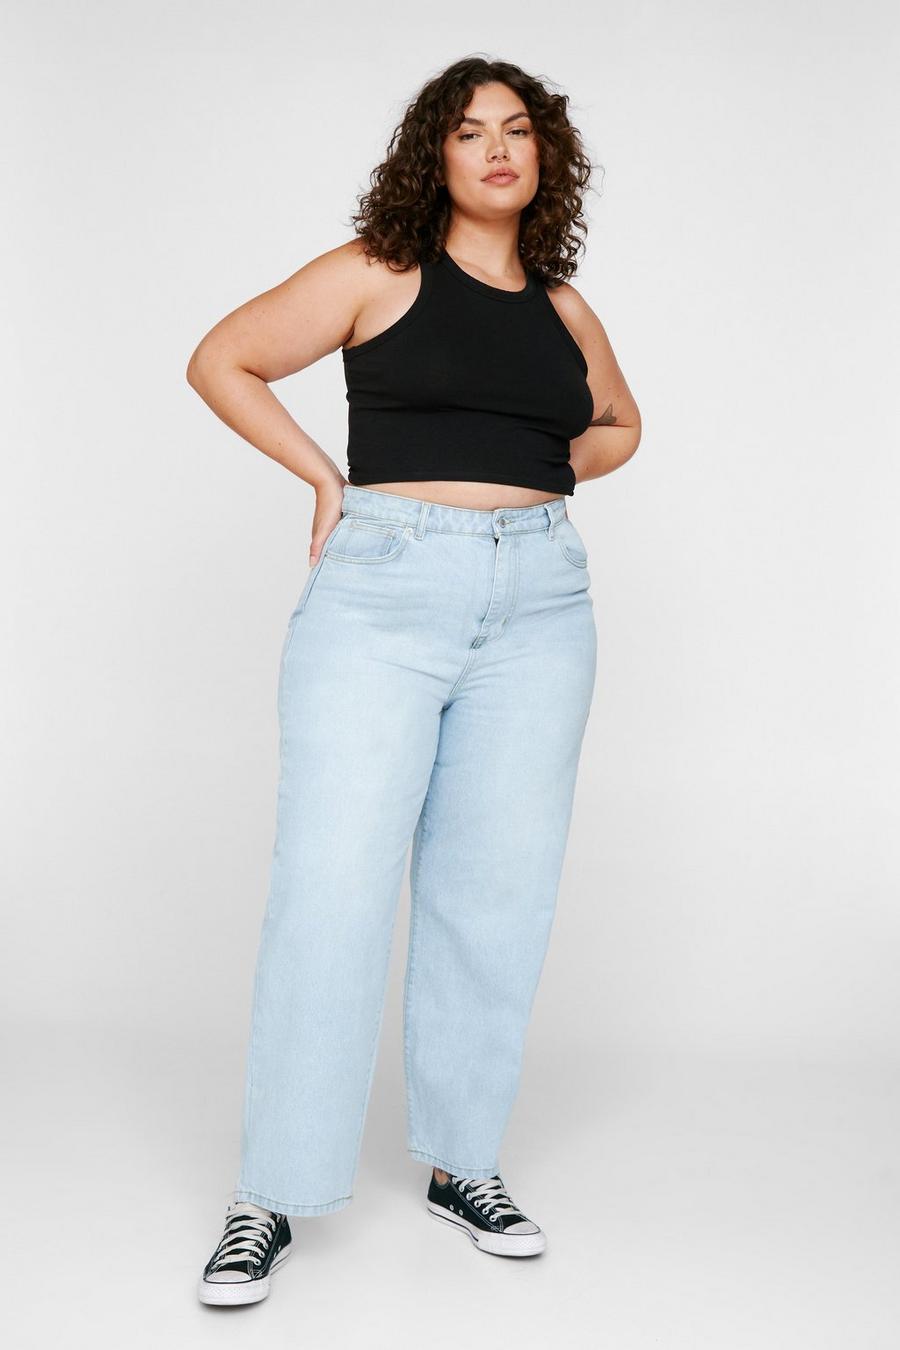 krybdyr hvede trend Plus Size Jeans | Curve Mom & Ripped Jeans | Nasty Gal